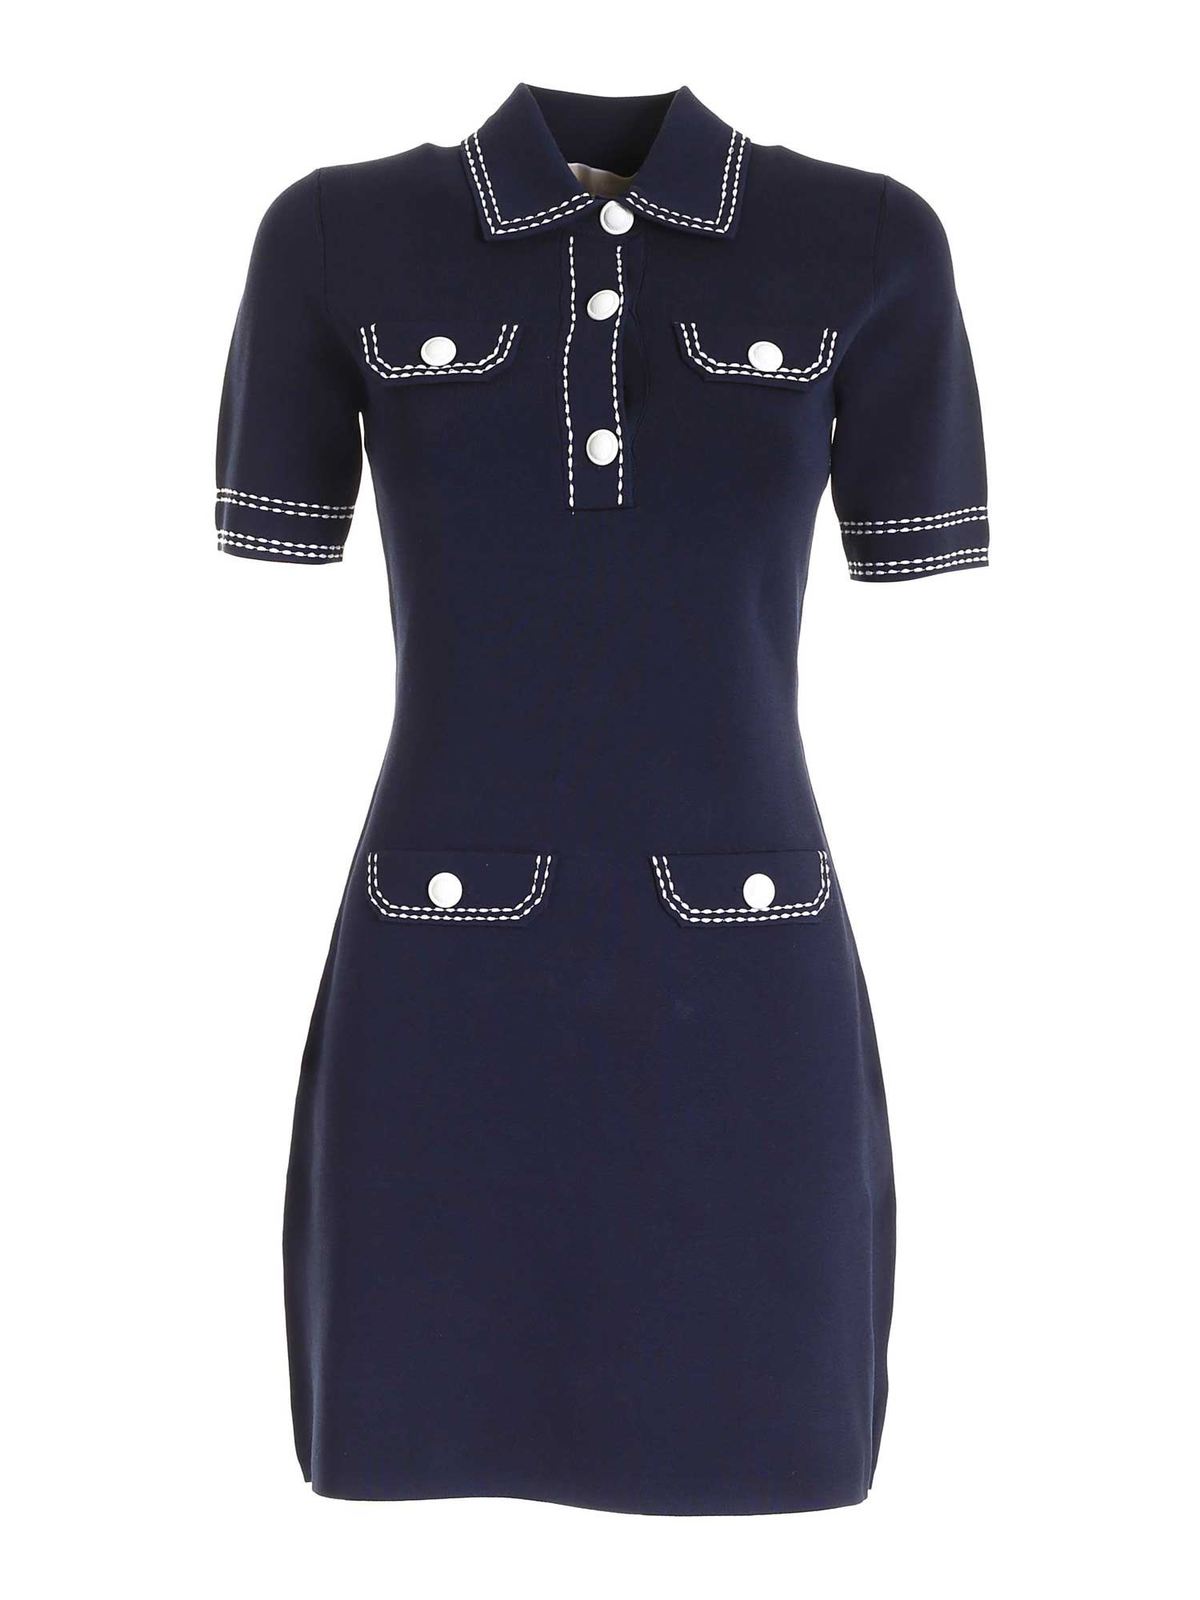 MICHAEL KORS CONTRASTING STITCHING DRESS IN BLUE